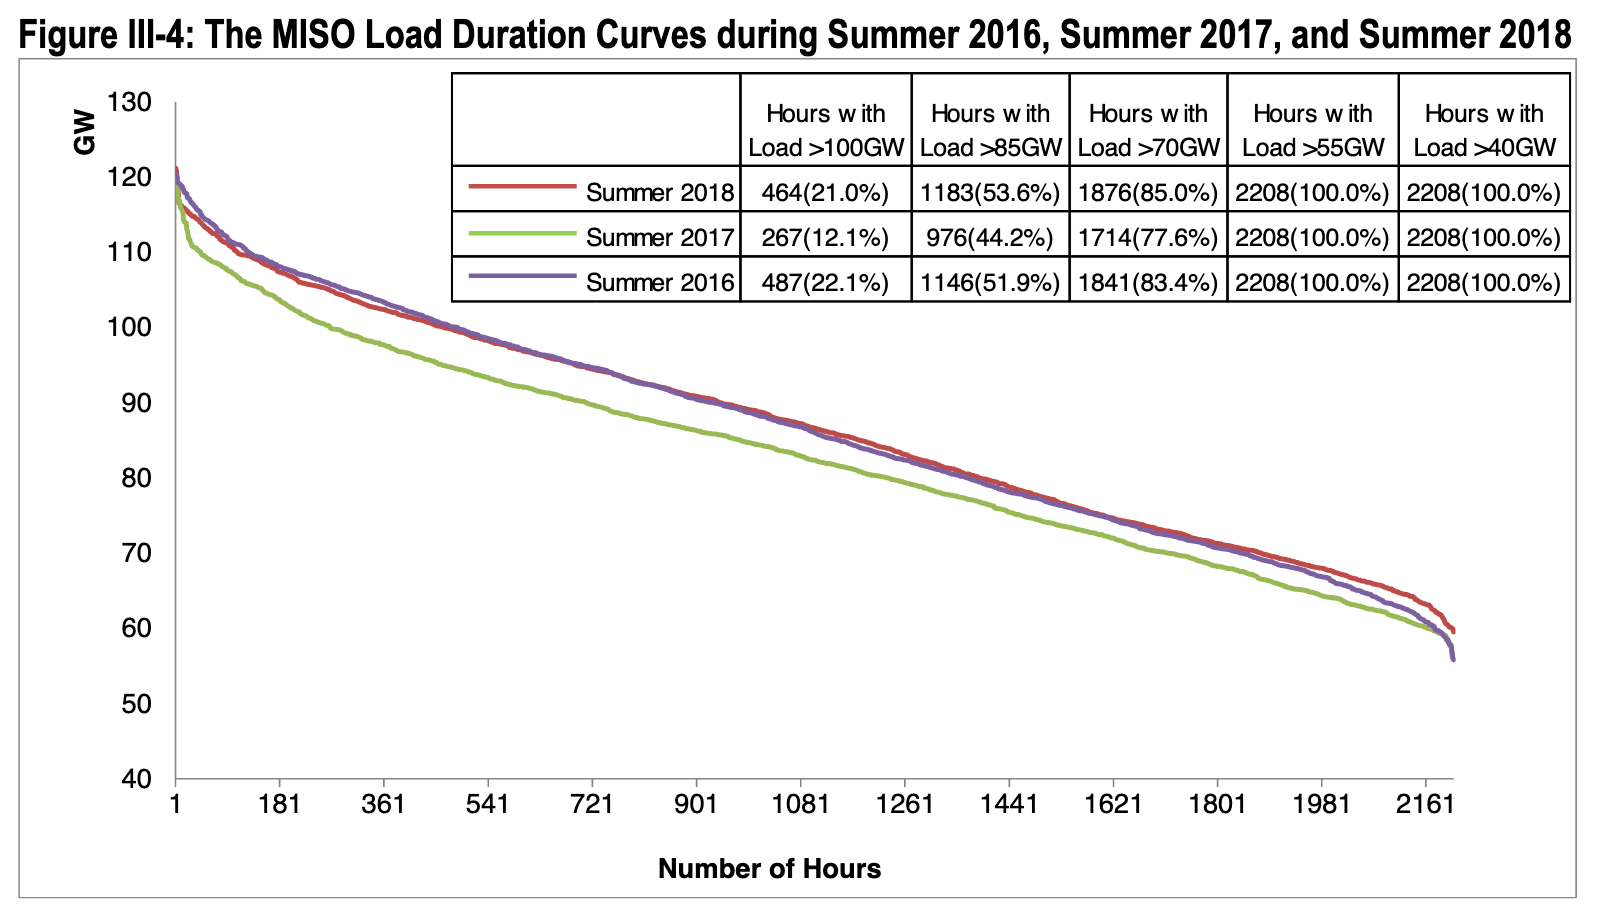 MISO Load Duration Curve